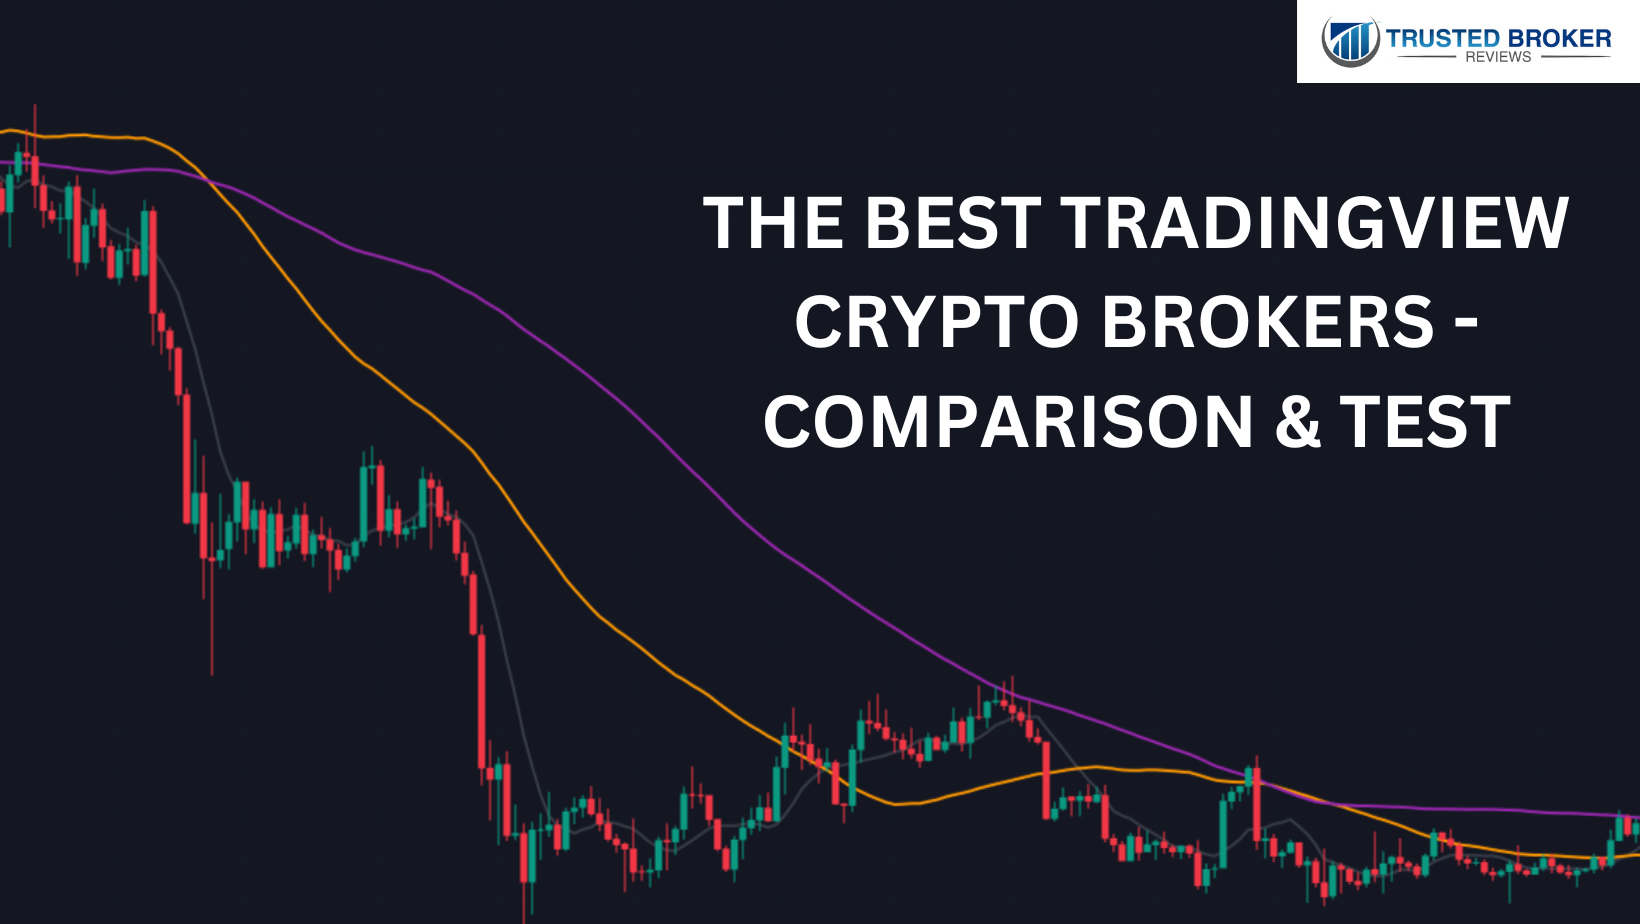 THE BEST TRADINGVIEW
CRYPTO BROKERS -
COMPARISON & TEST